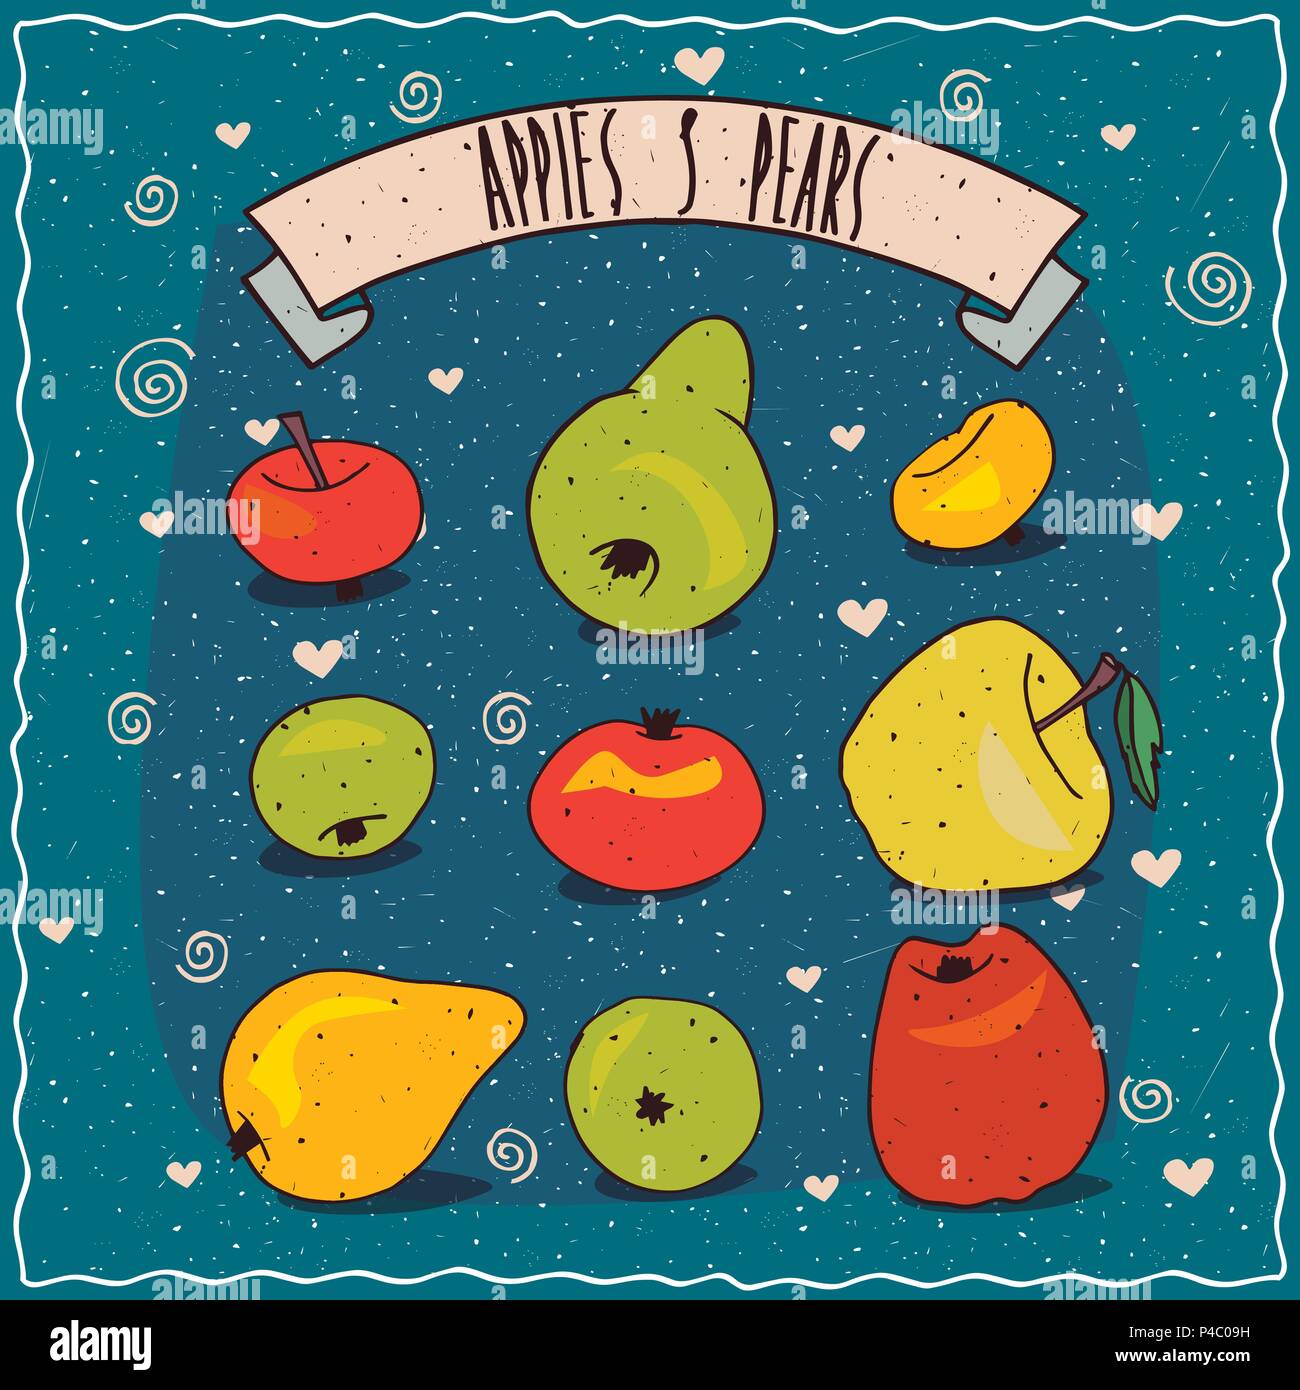 Set of colorful clip art of fruits, apples and pears of different sizes, shapes and colors. Hand drawn in comic style. Lettering on ribbon Stock Vector